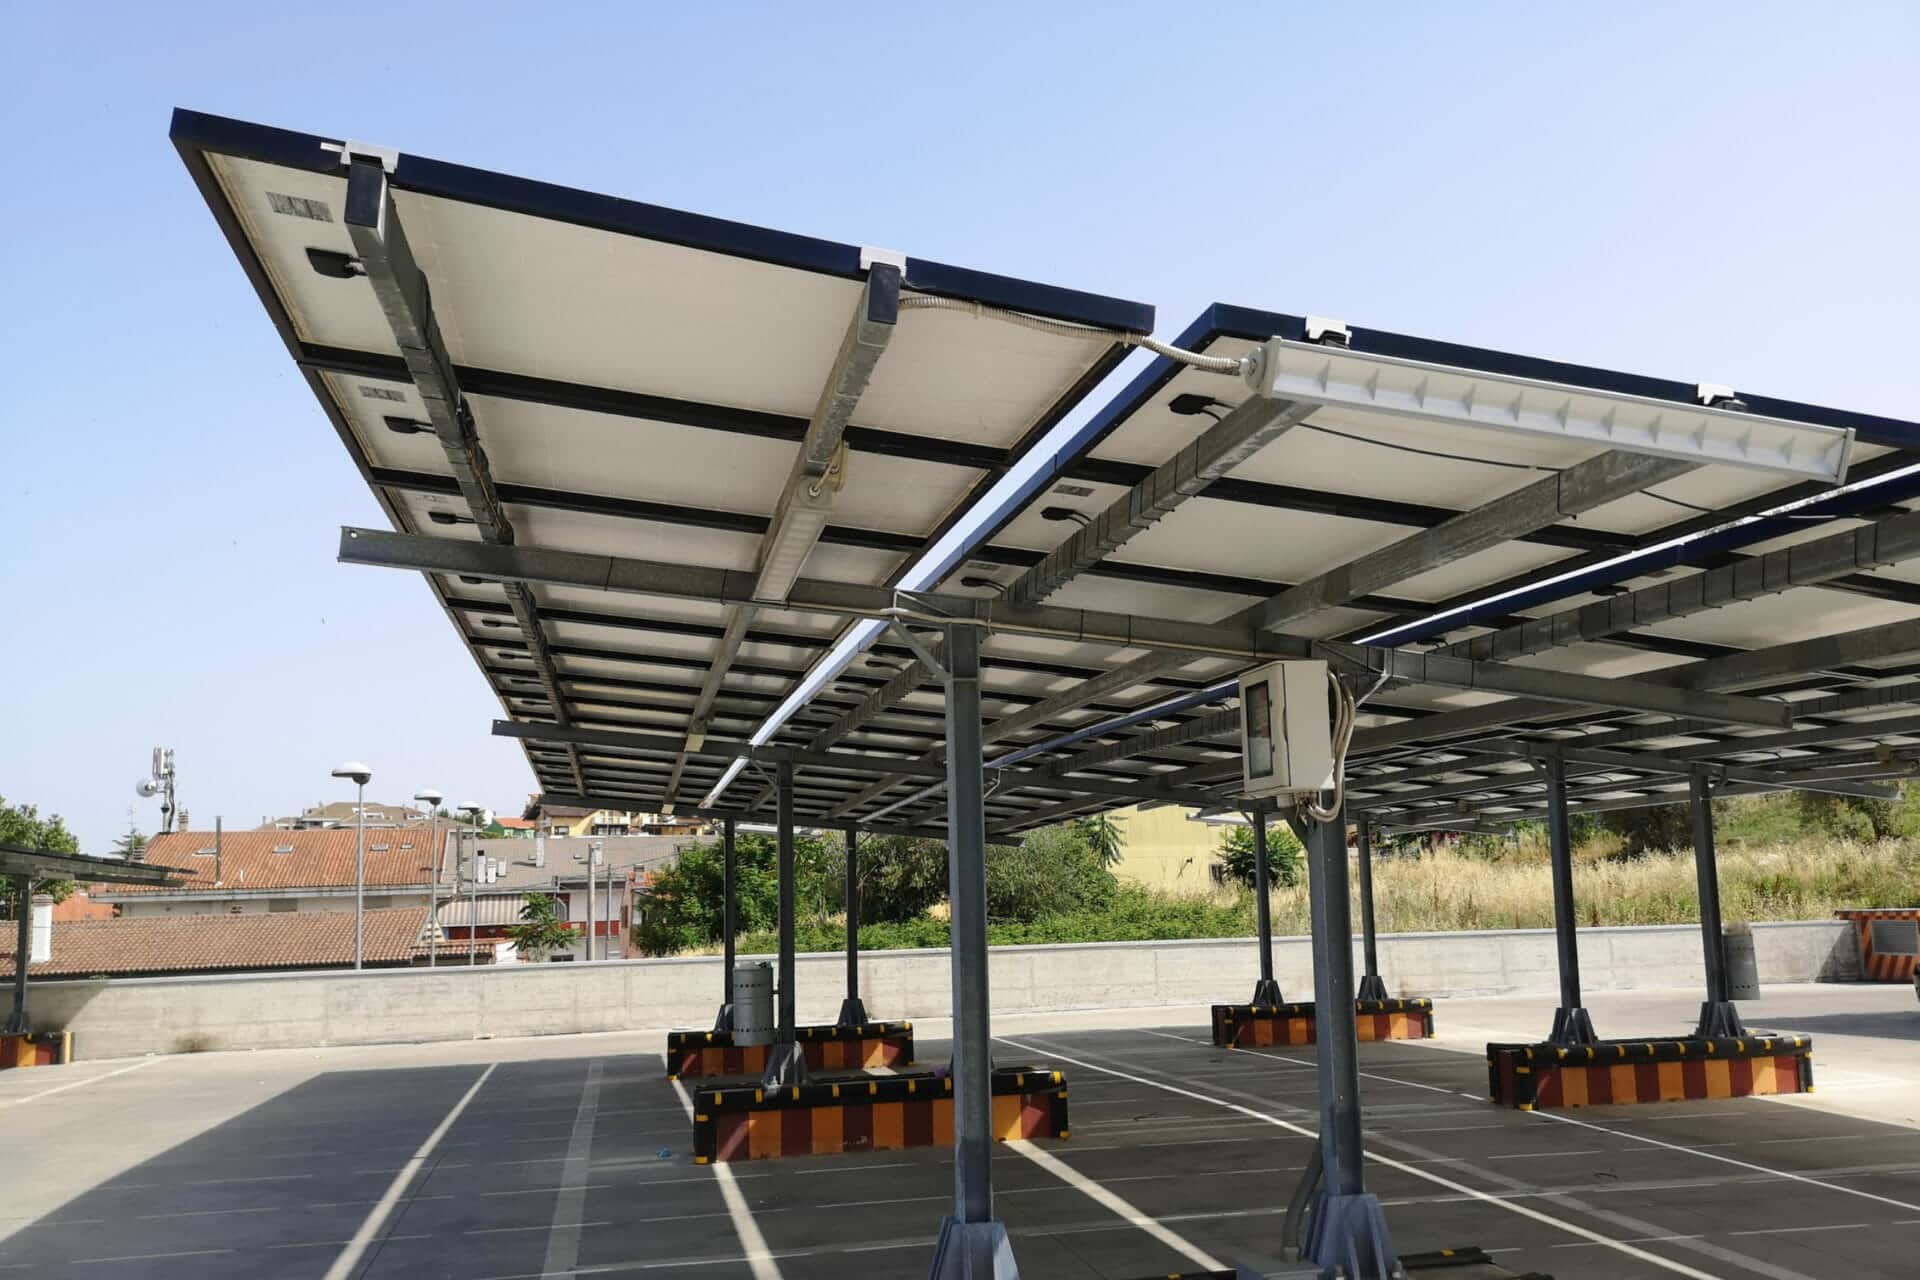 Covered Parking Lot with Solar